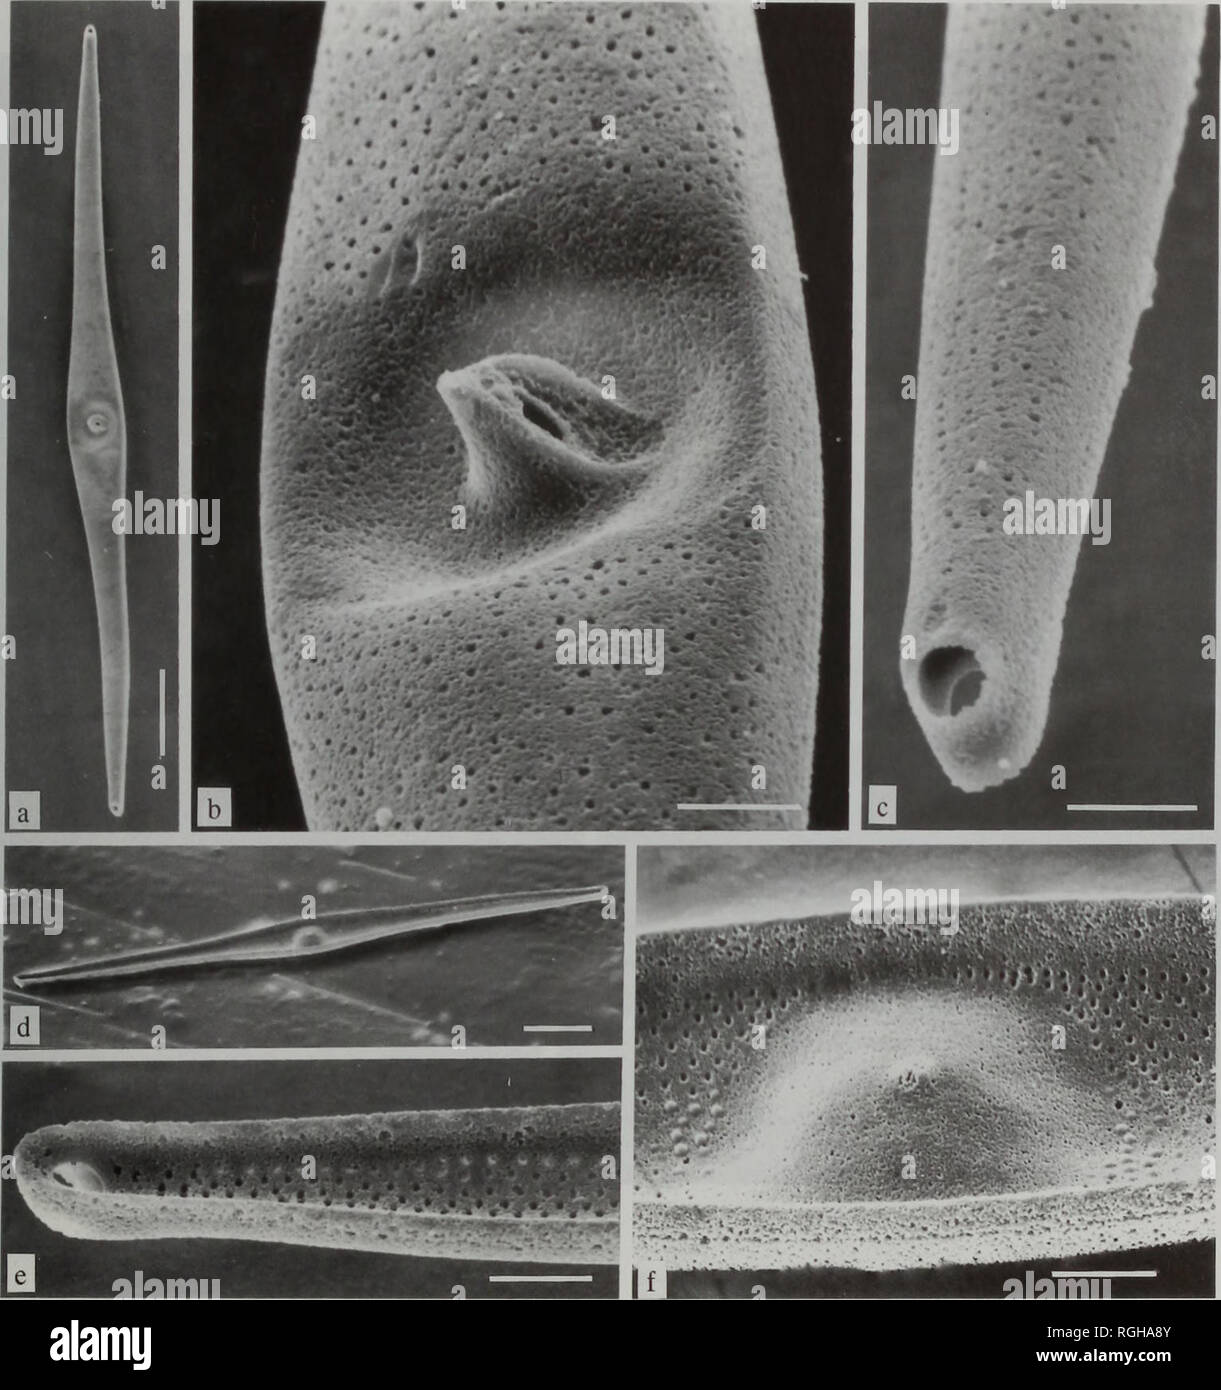 . Bulletin of the British Museum (Natural History), Botany. REVISION OF RUTILARIA GREVILLE (BACILLARIOPHYTA) 83. Plate XIV Rutilaria lanceolata. Oamaru, New Zealand, (a): valve view of valve with periplekton broken off (SEM 72690); (b): detail of (a) showing central portion of valve with depressed central area (SEM 72688); (c): detail of (a), distal part of valve showing ocellus broken away, longitudinal striae and valve curving down into hyaline mantle (SEM 72689); (d): oblique internal valve view of single valve (SEM 72816); (e): detail of (d) showing apex of valve (SEM 72818); (f): detail o Stock Photo